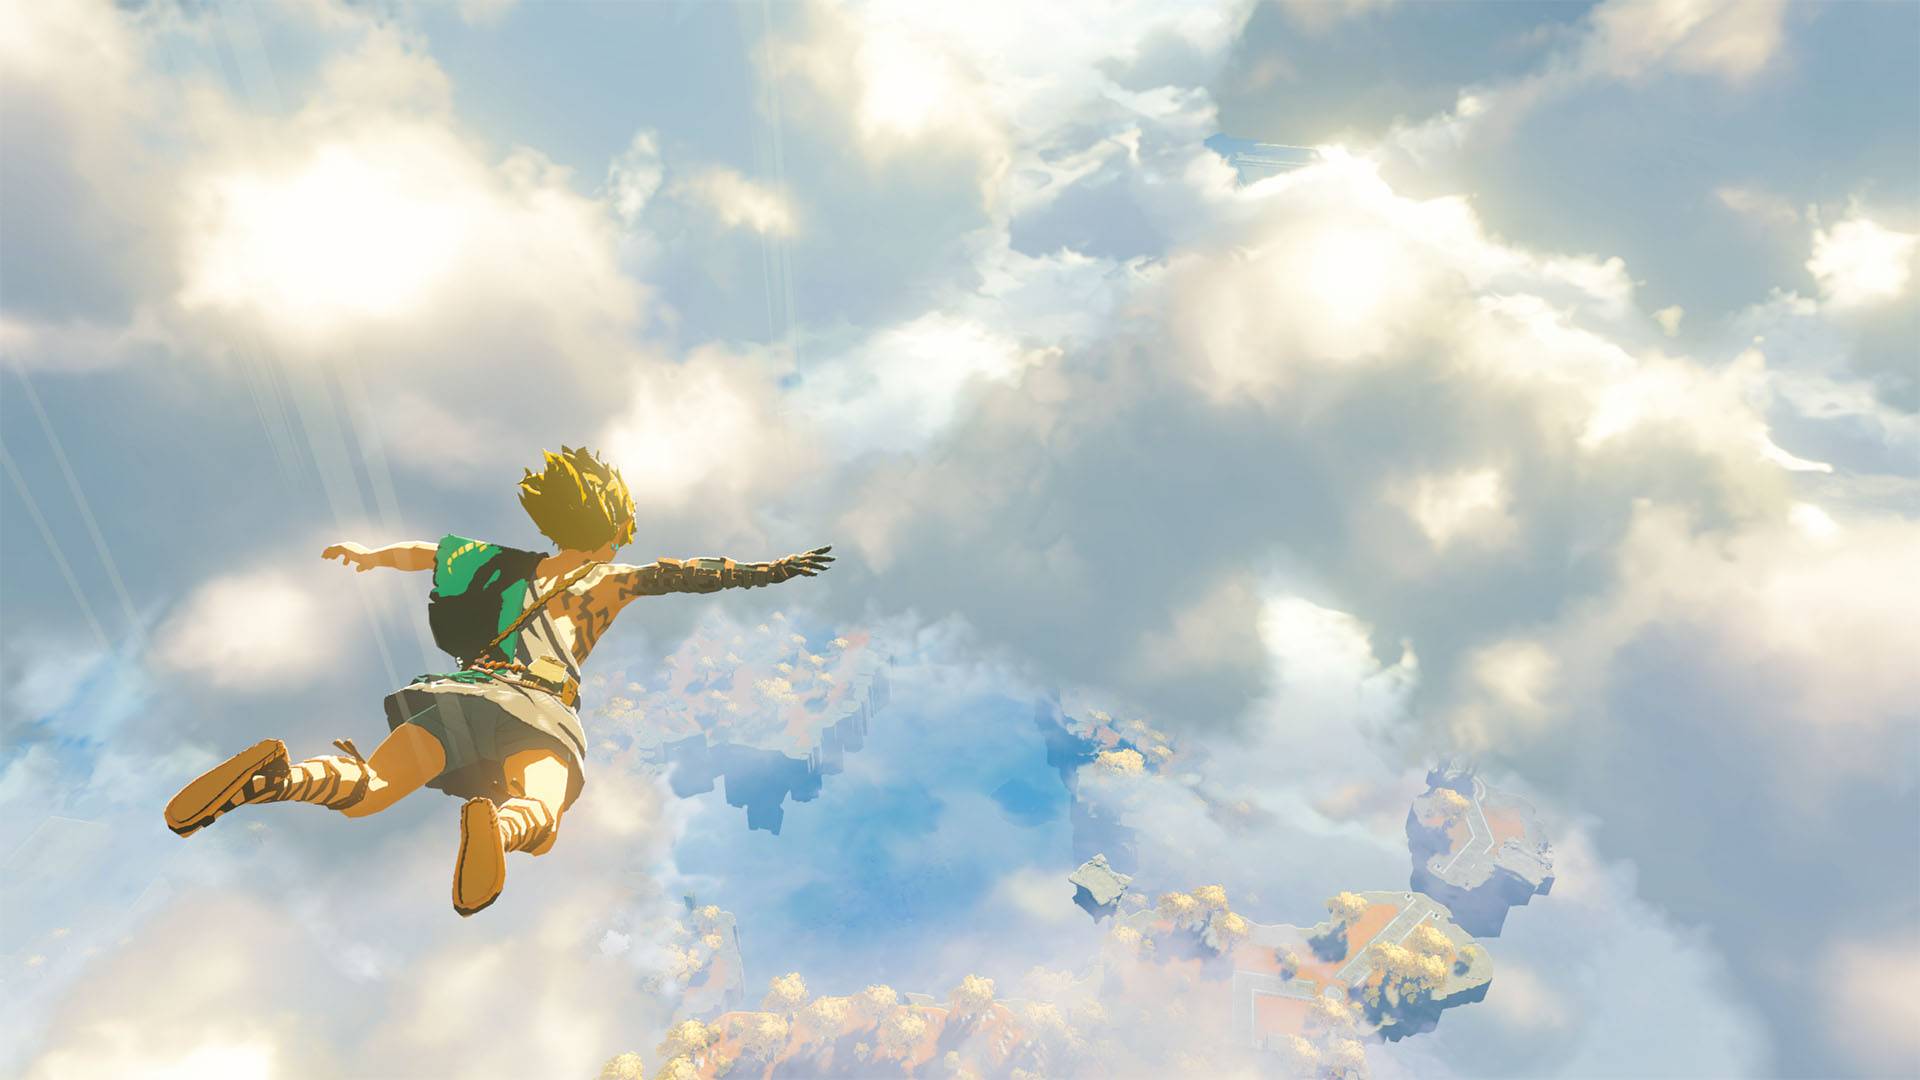 Link from the Legend of Zelda Breath of The Wild floats through the sky